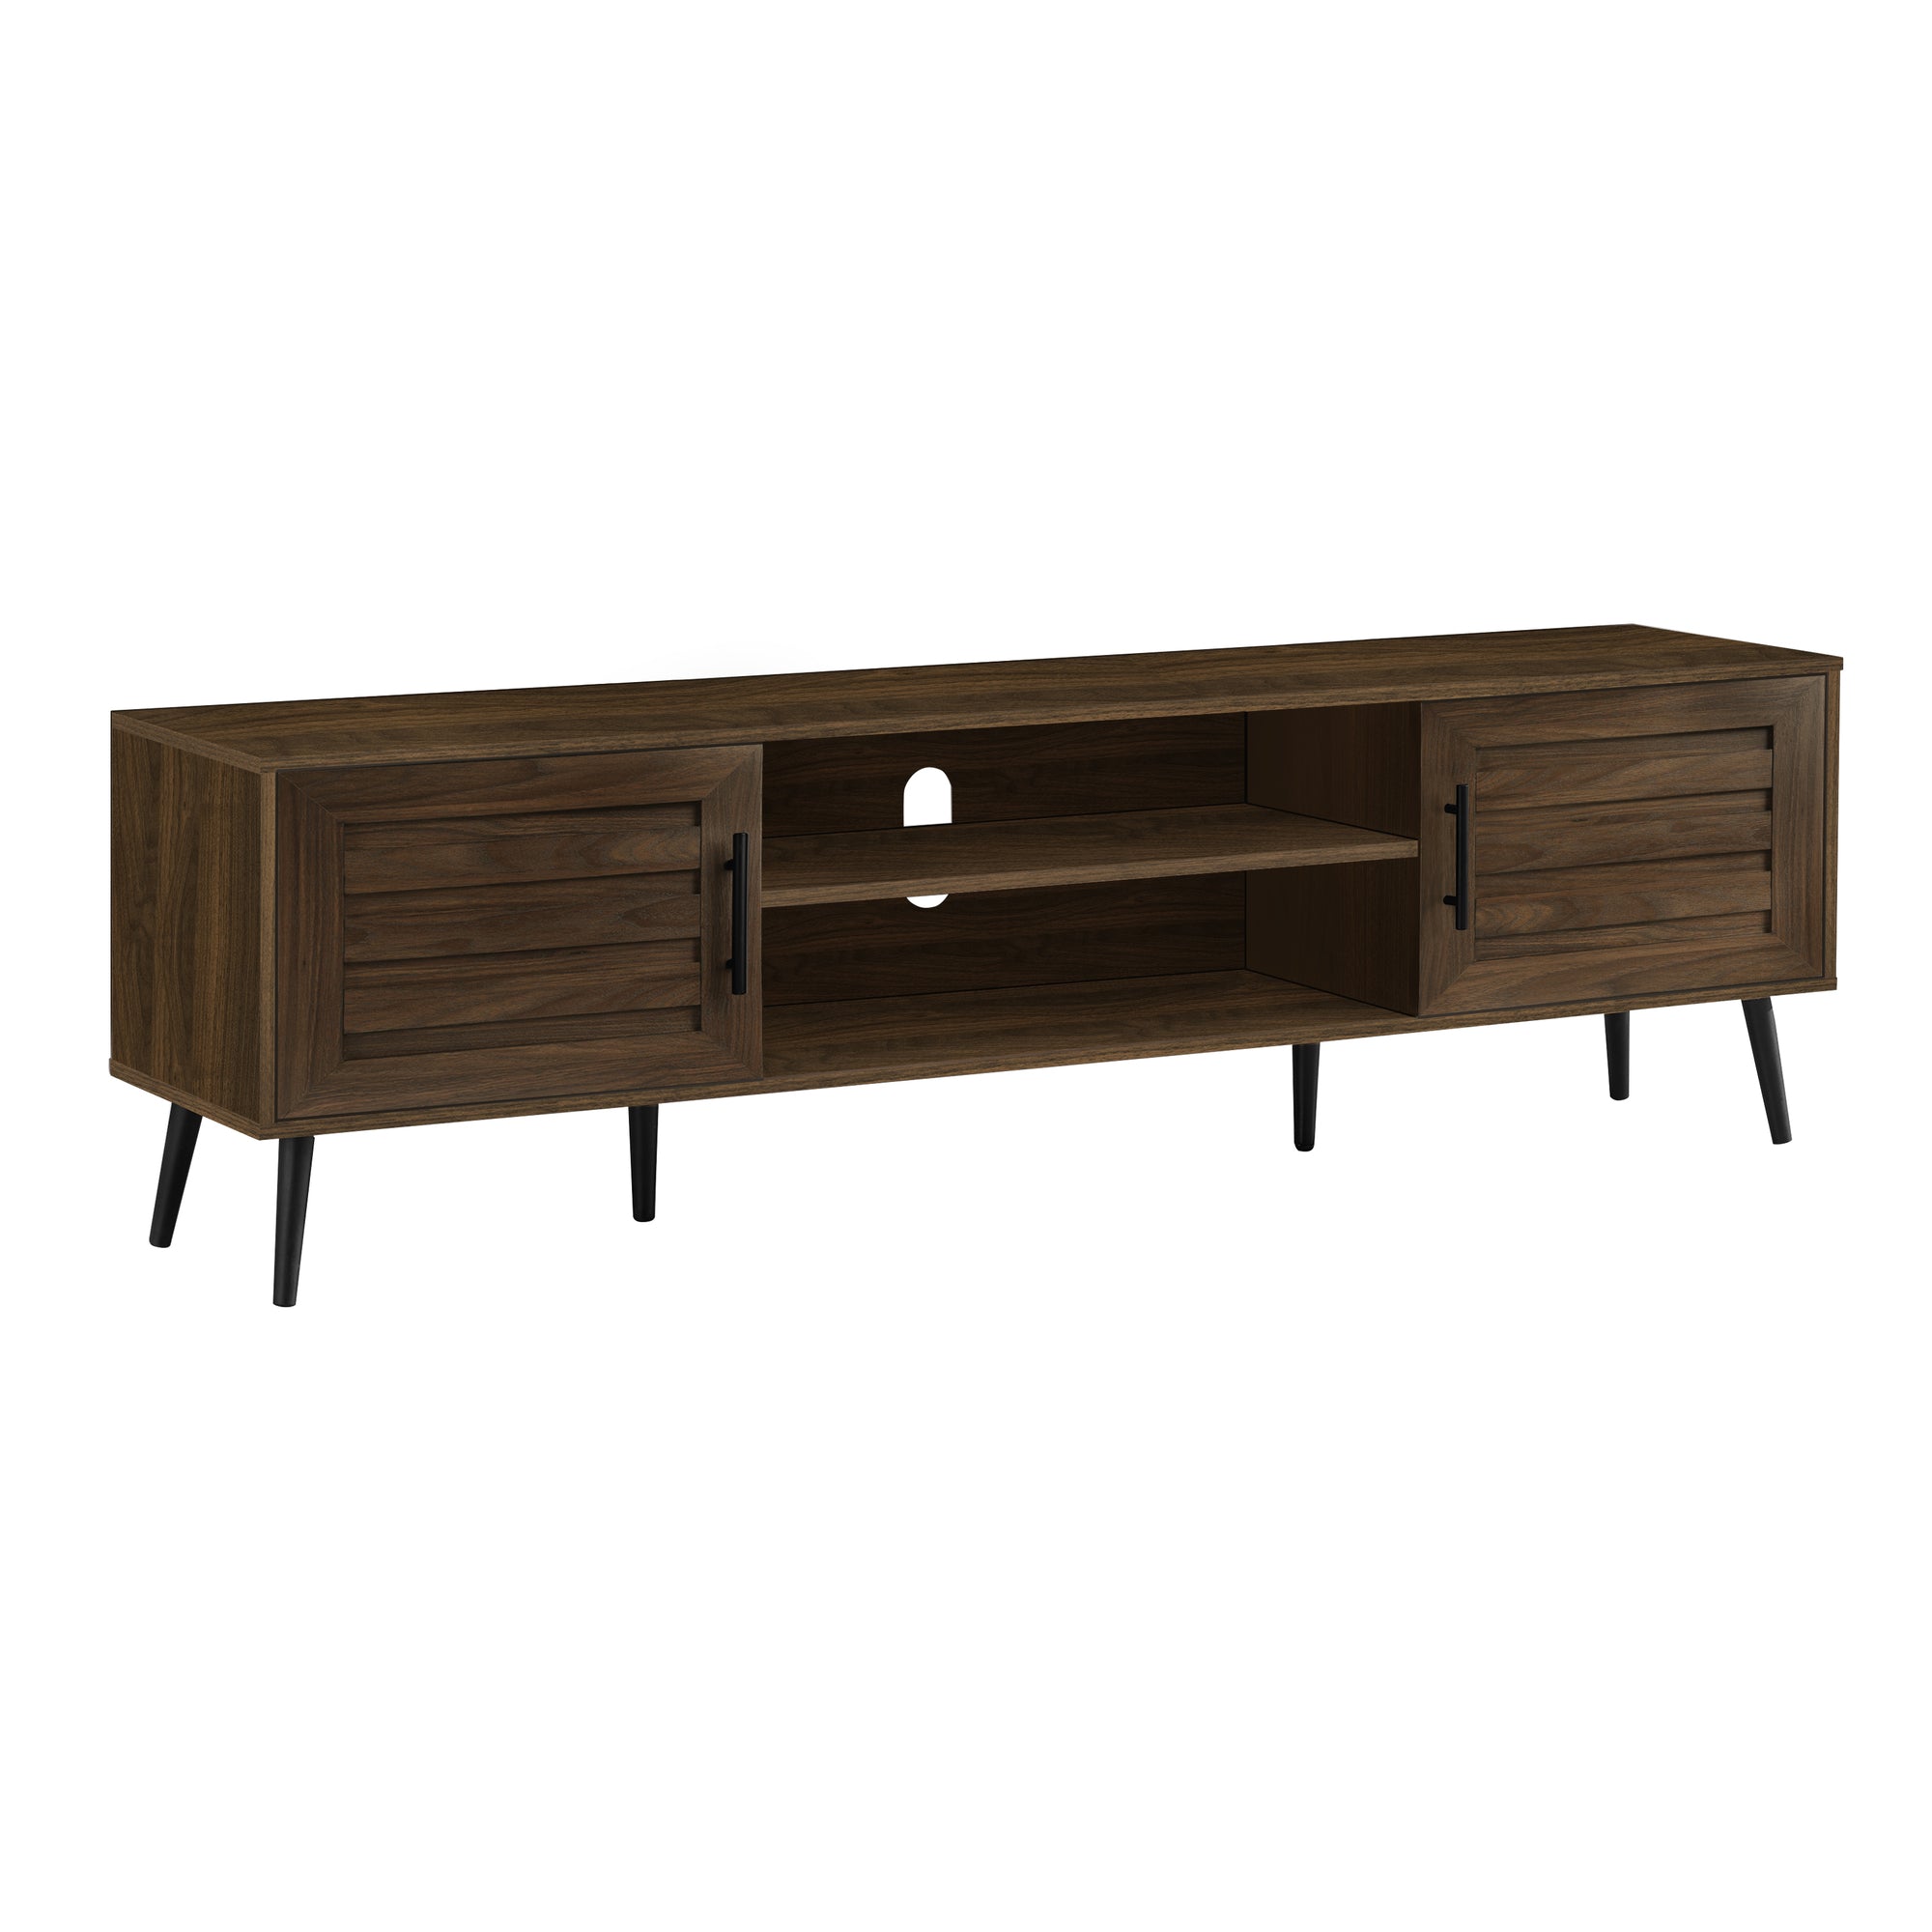 I 2717 - TV STAND - 72"L / BROWN WOOD-LOOK WITH 2 DOORS BY MONARCH SPECIALTIES INC